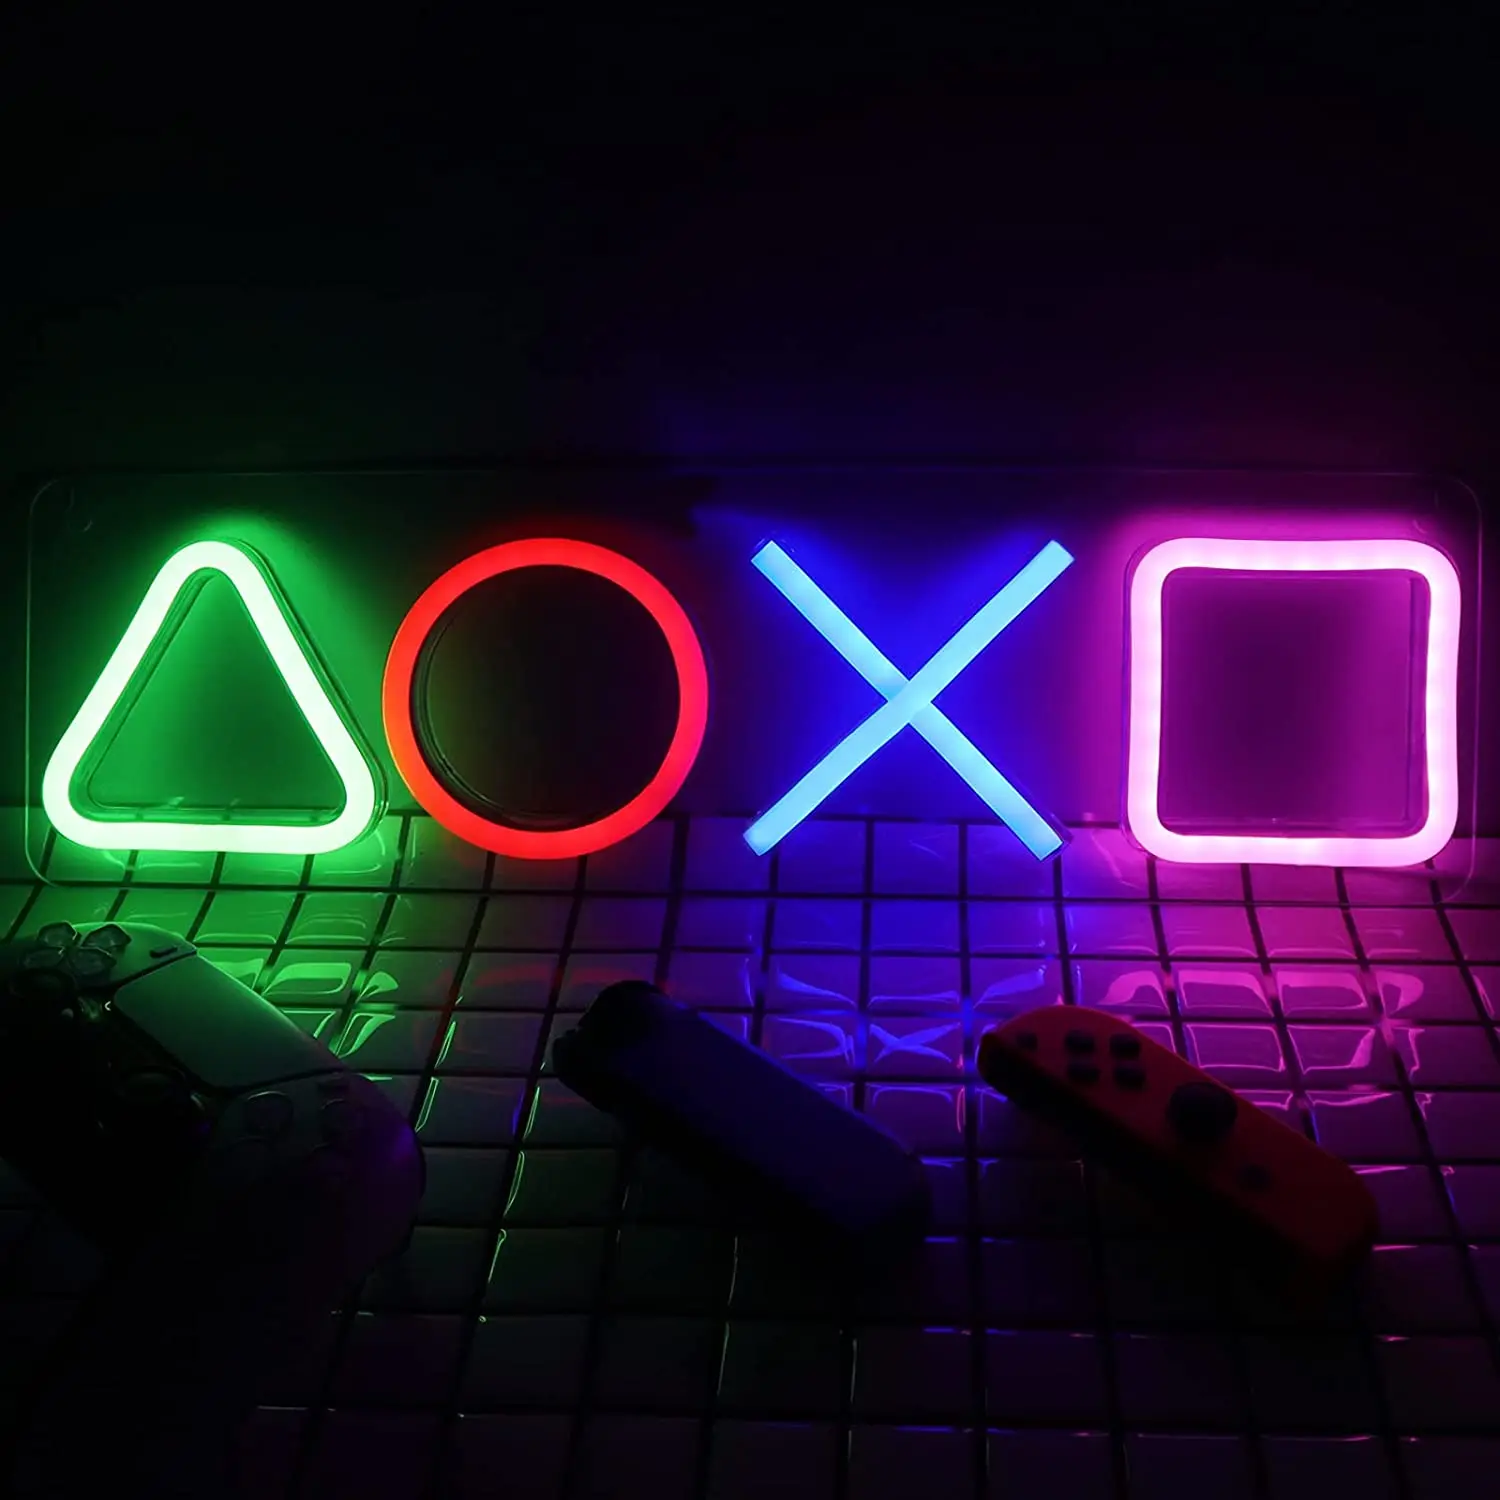 

Icon Gaming Ps4 Game Neon Light Sign Control Decorative Lamp Colorful Lights Game Lampstand Led Light Bar Club Wall Decor